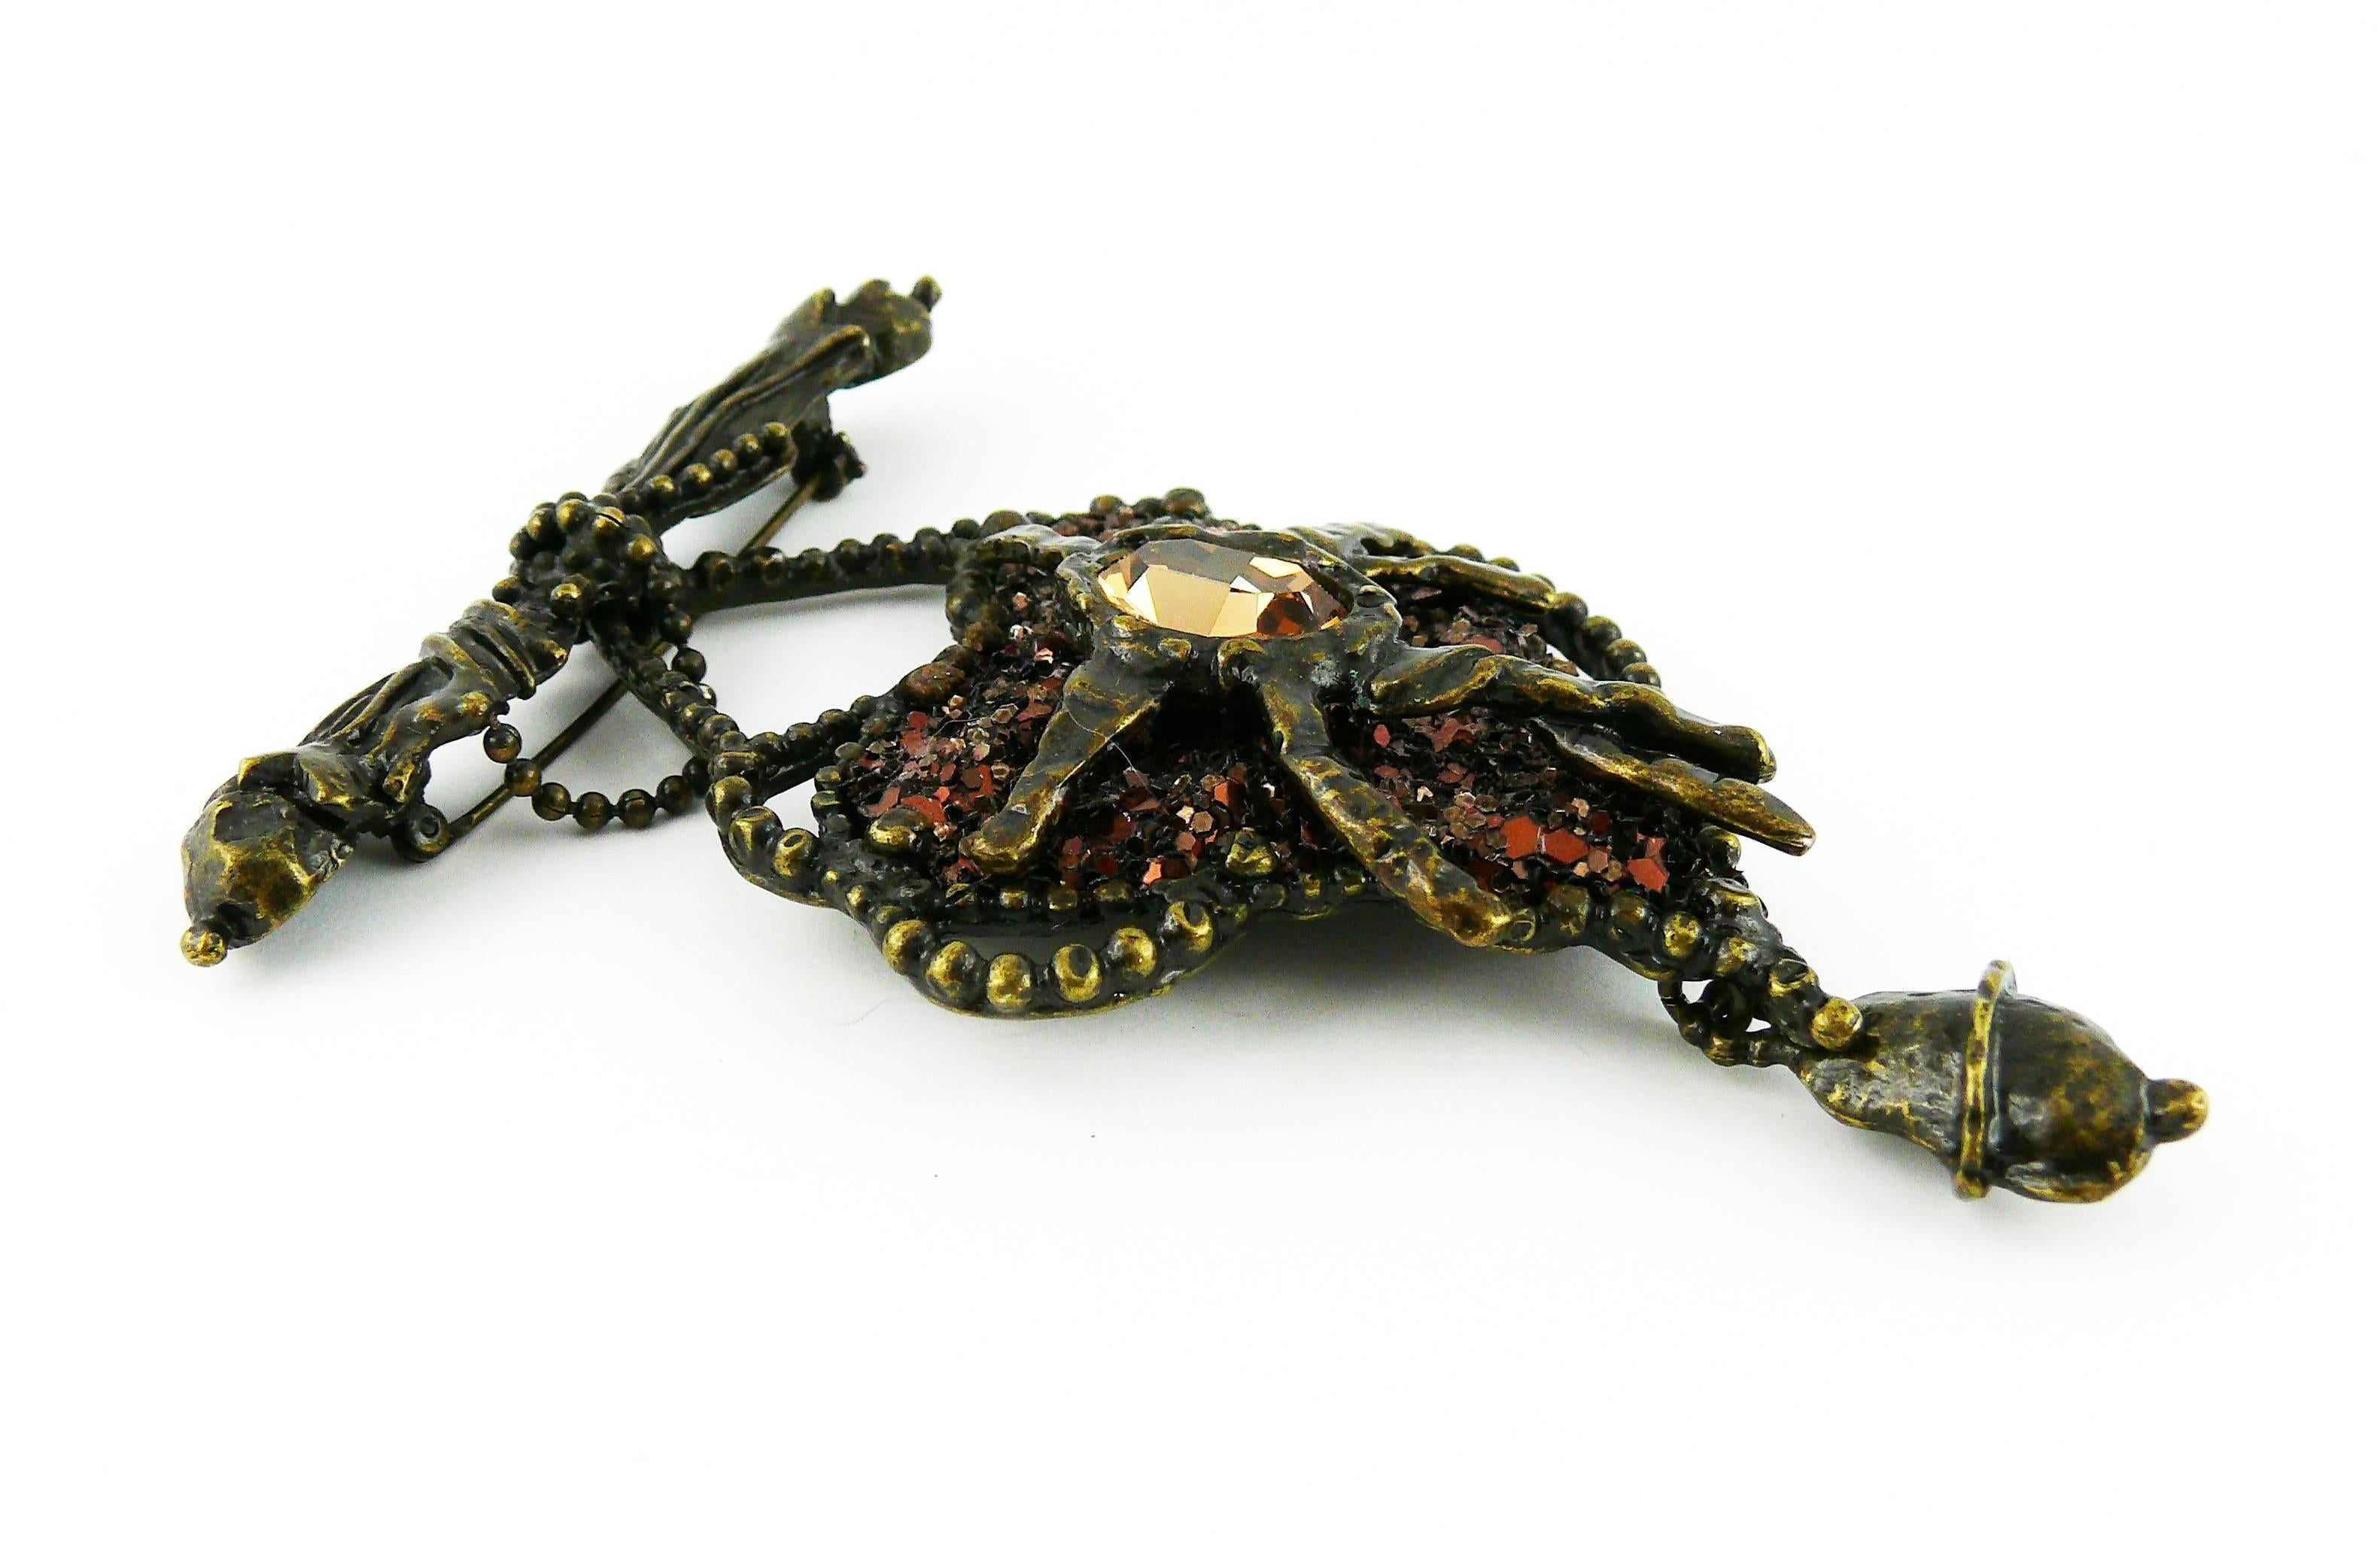 CHRISTIAN LACROIX vintage massive brutalist jewelled heart brooch.

This gun patina brooch consists of three parts : a stylized ribbon bar pin, a dangle abstract heart and a charm.

Marked CHRSITIAN LACROIX CL Made in France.

JEWELRY